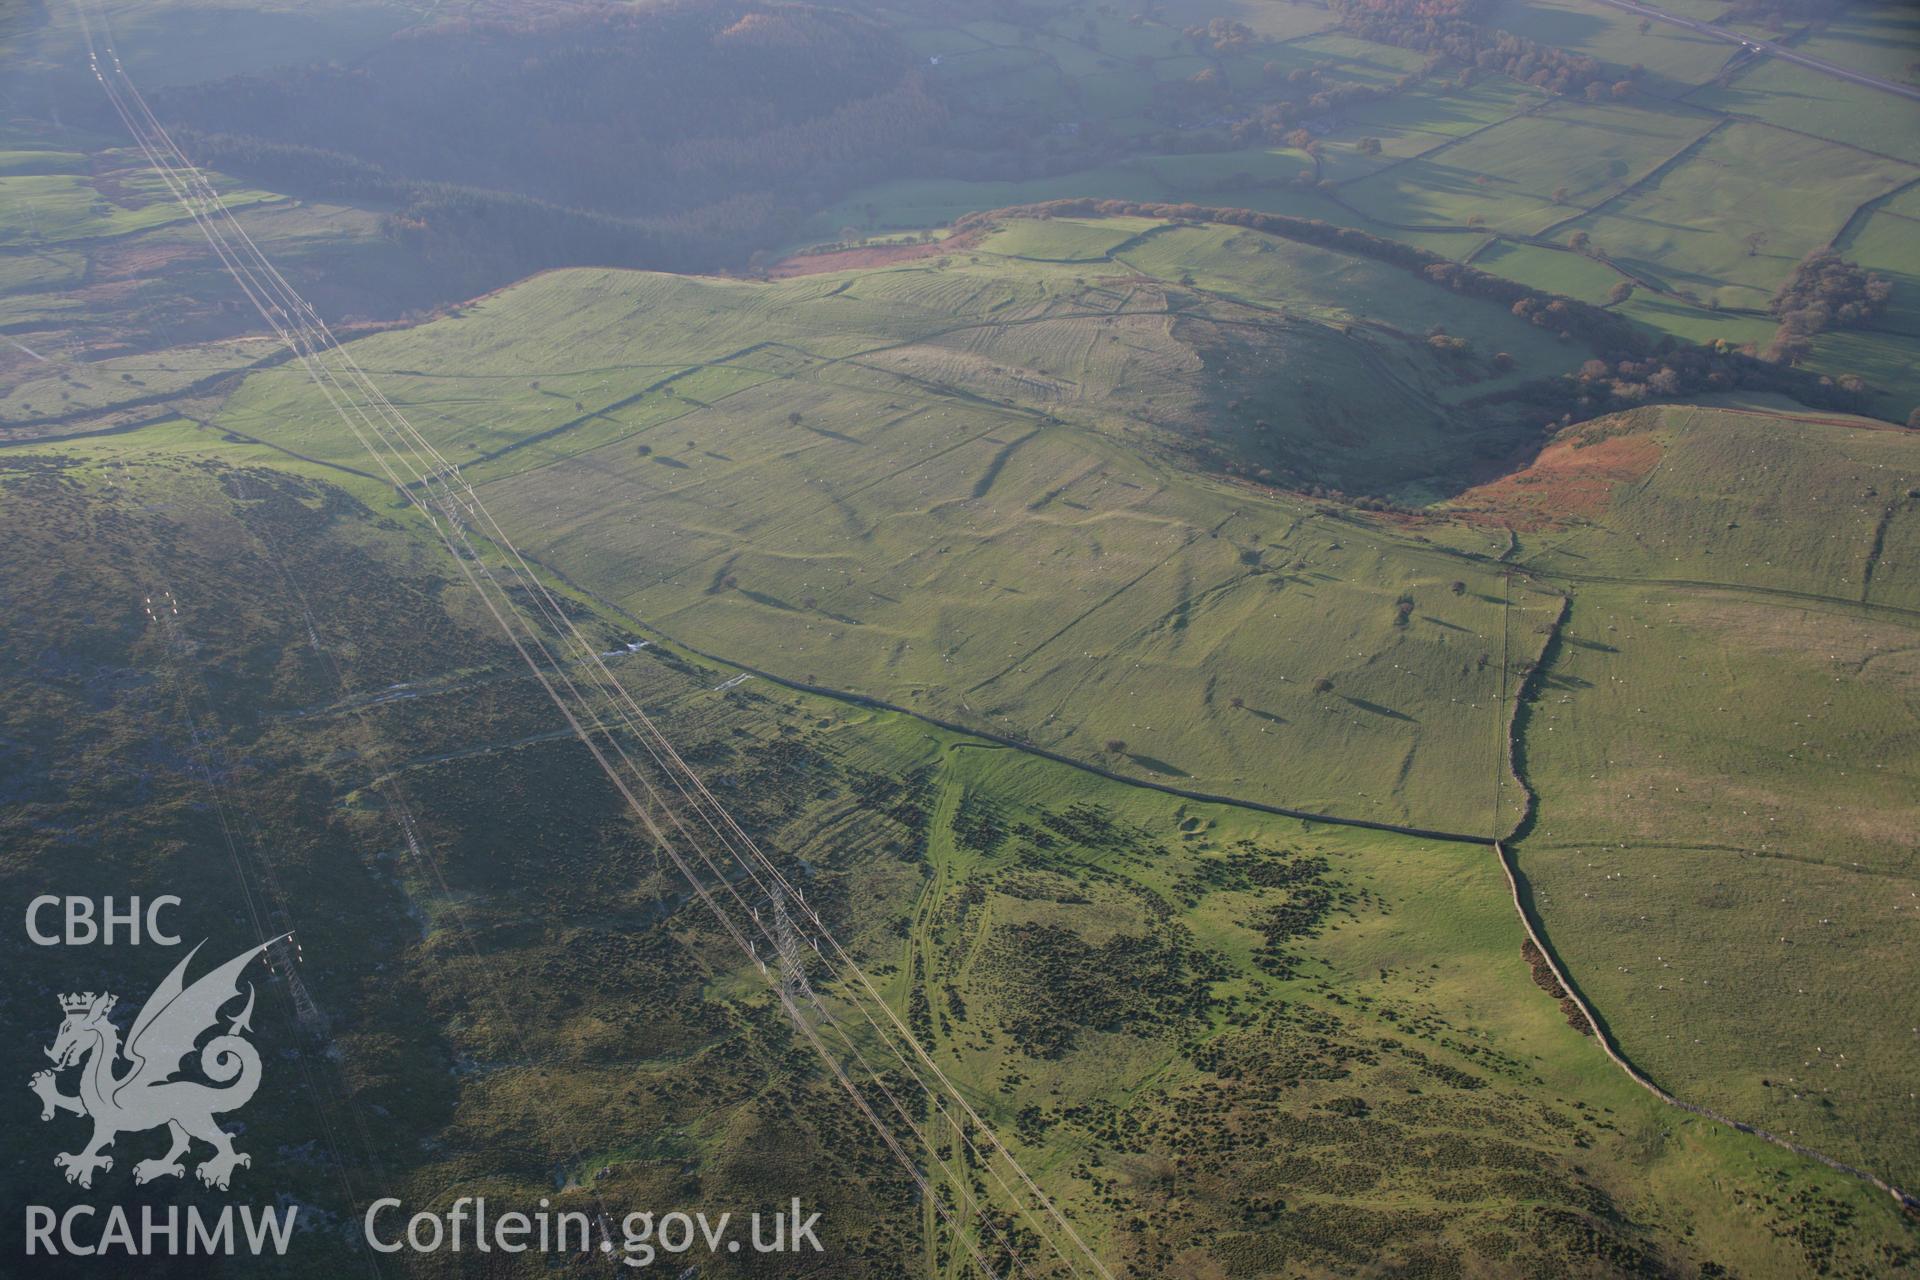 RCAHMW colour oblique aerial photograph of Ffridd Ddu Field System from the east. Taken on 21 November 2005 by Toby Driver